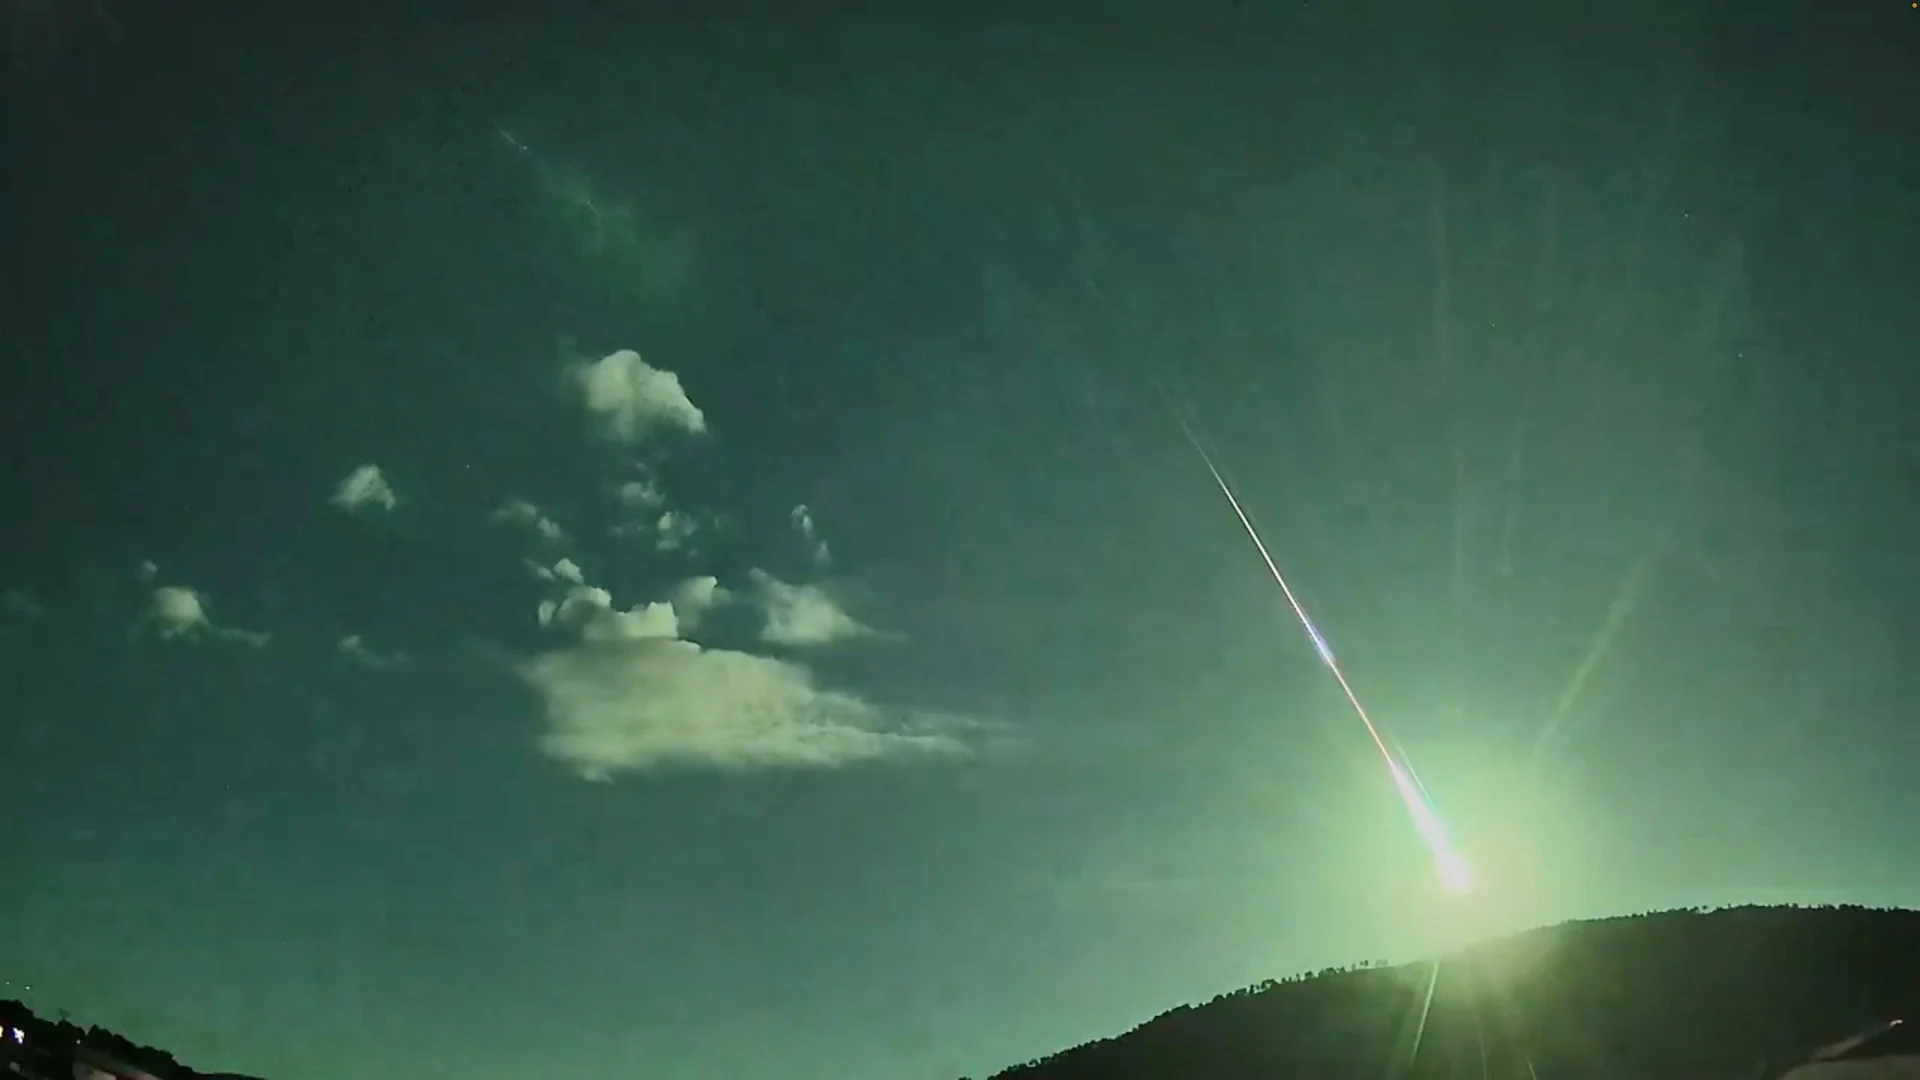 Comet fragment lights up sky over Spain and Portugal "like a movie." See the stunning video, here!